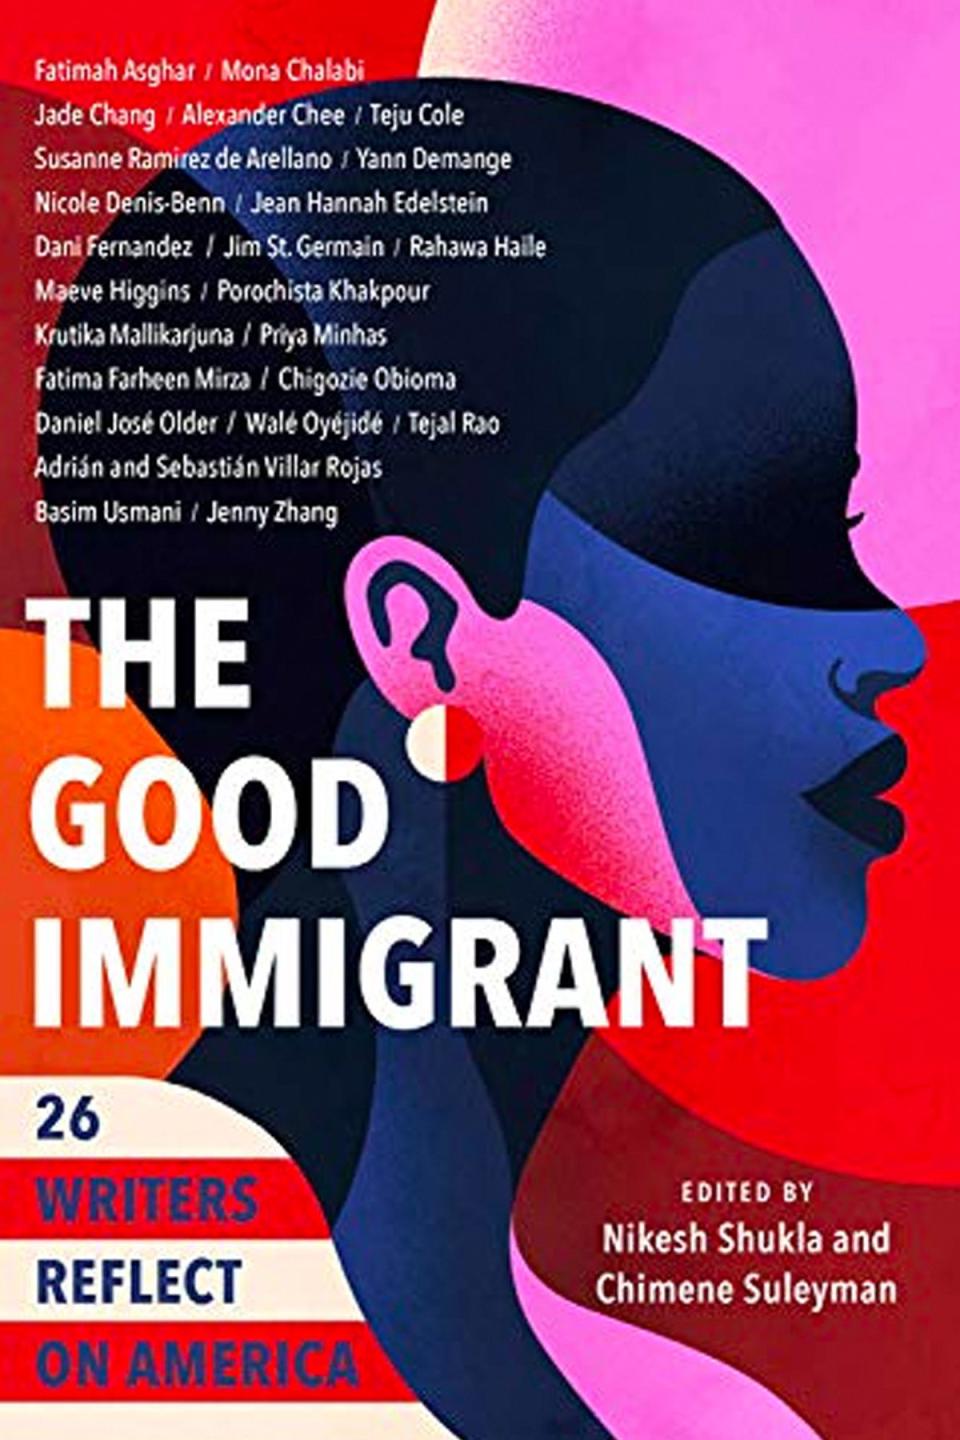 'The Good Immigrant: 26 Writers Reflect on America'